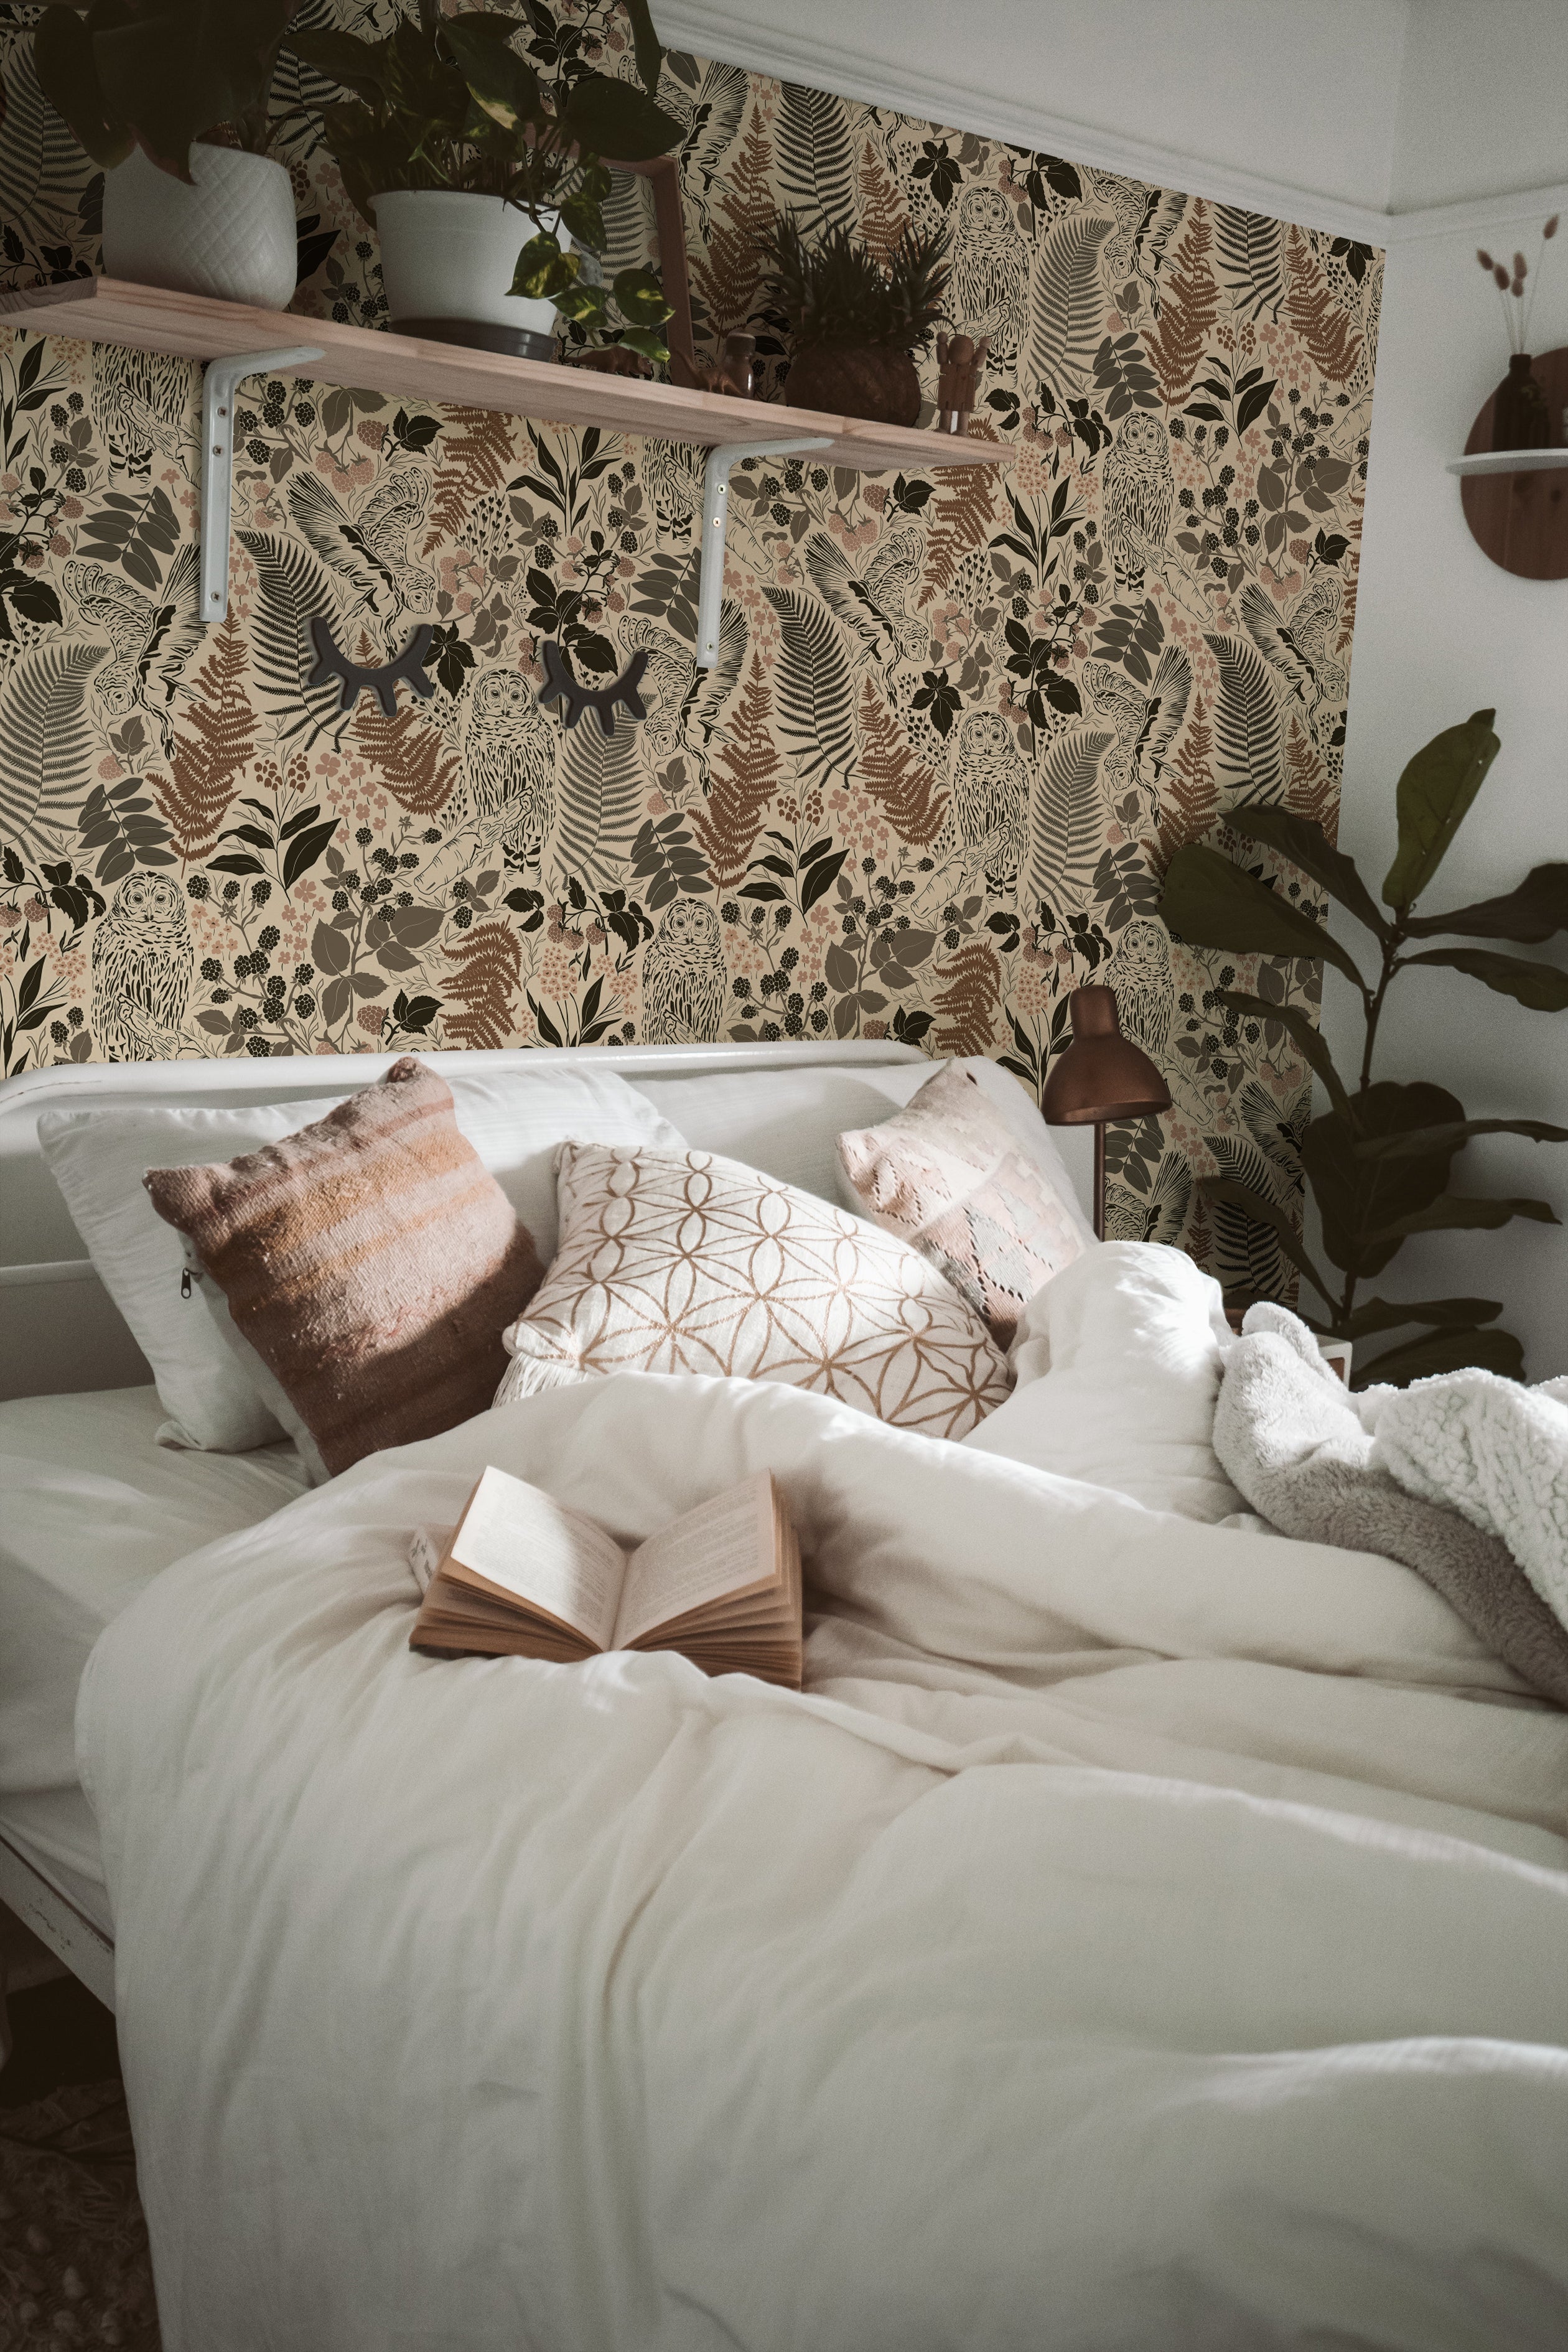 A serene bedroom with a wall covered in an owl and botanical pattern wallpaper, combining taupe, beige, and black hues, complemented by indoor plants and a cozy, well-dressed bed.